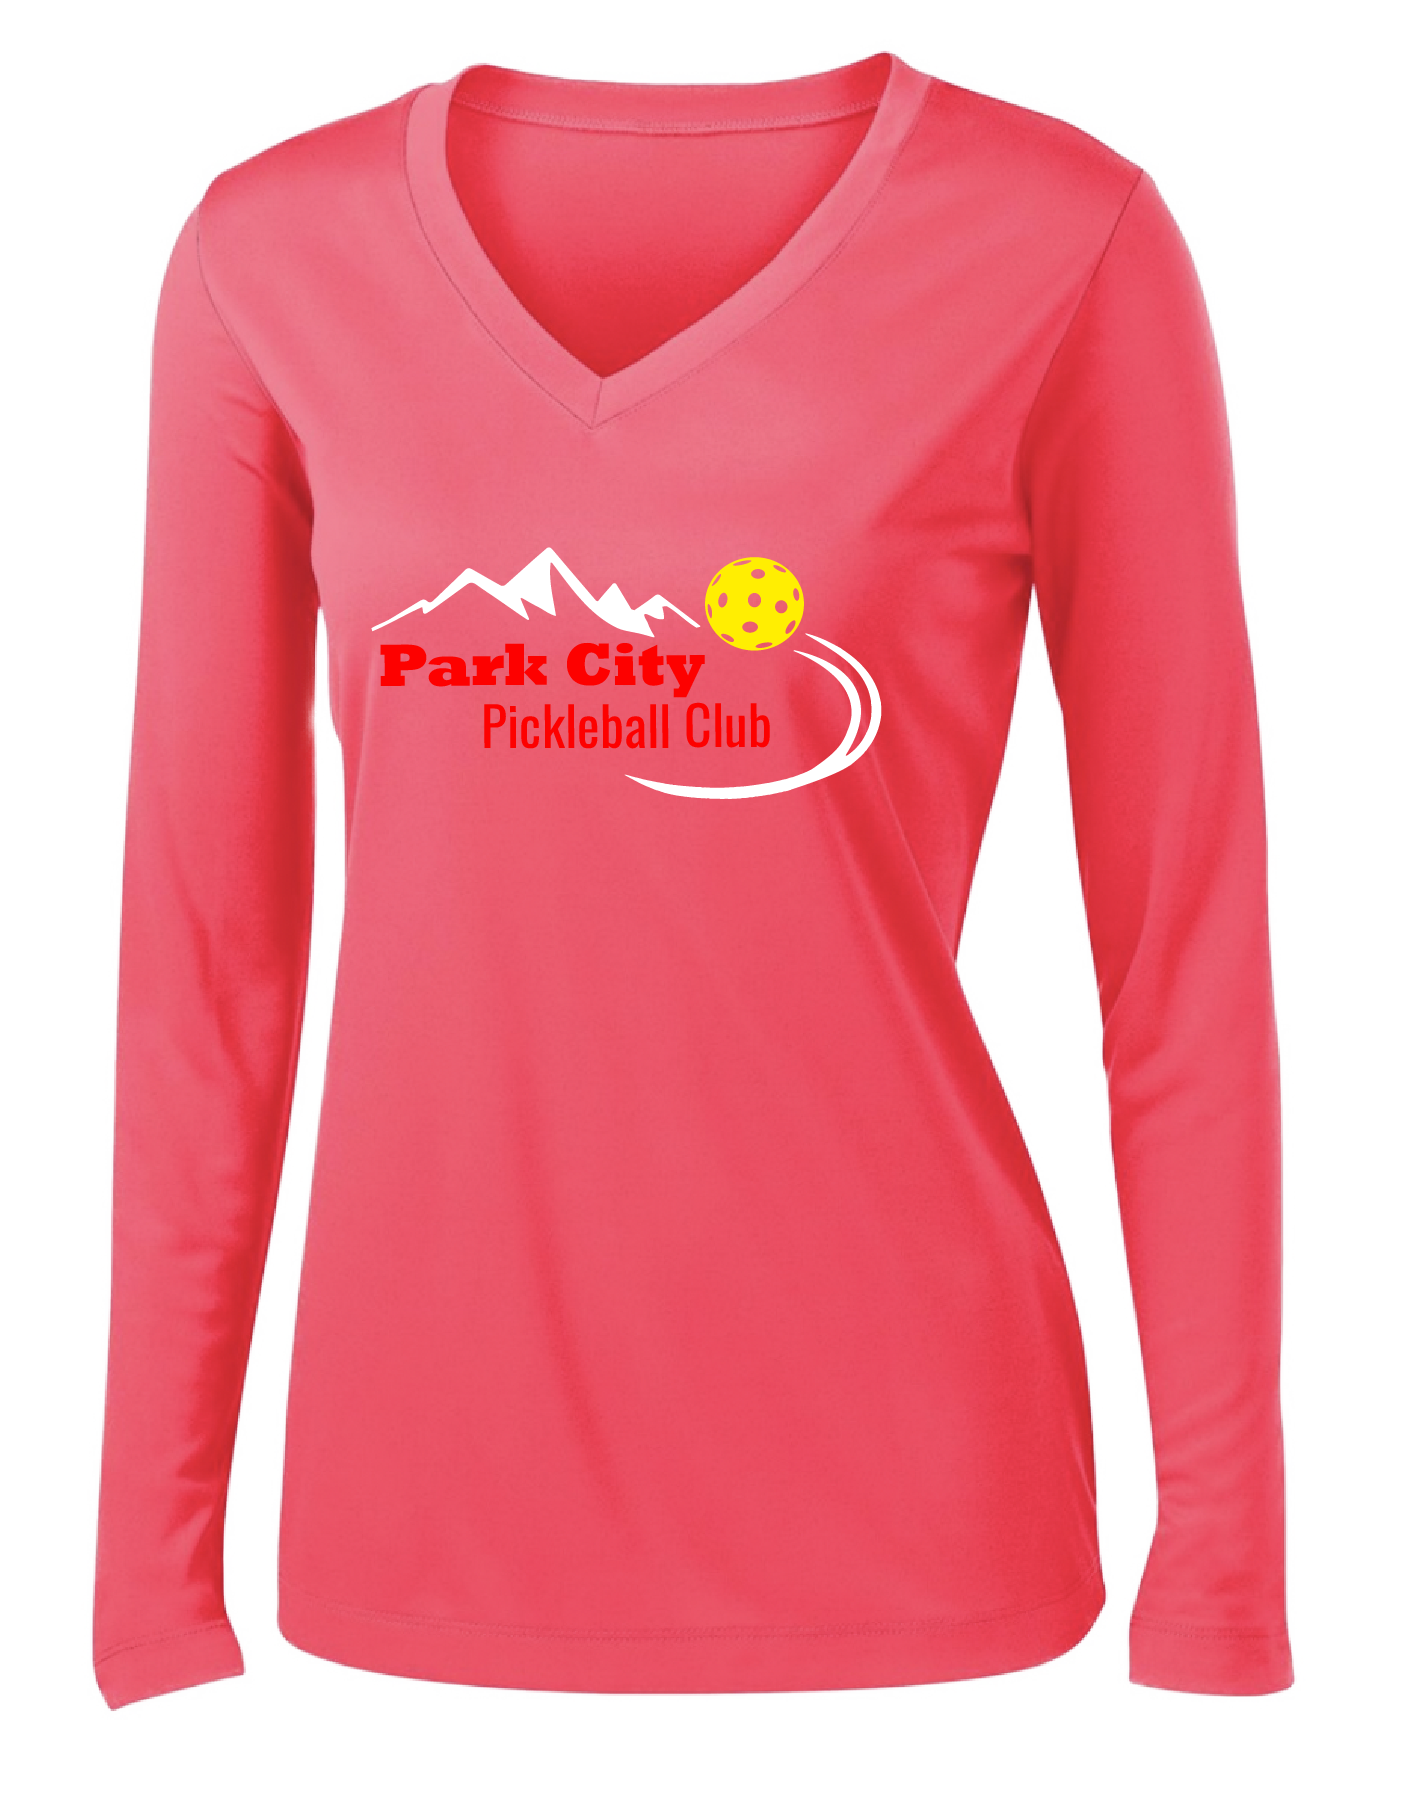 Pickleball Design: Park City Pickleball Club (red words)  Women's Style: Long Sleeve V-Neck  Turn up the volume in this Women's shirt with its perfect mix of softness and attitude. Material is ultra-comfortable with moisture wicking properties and tri-blend softness. PosiCharge technology locks in color. Highly breathable and lightweight.